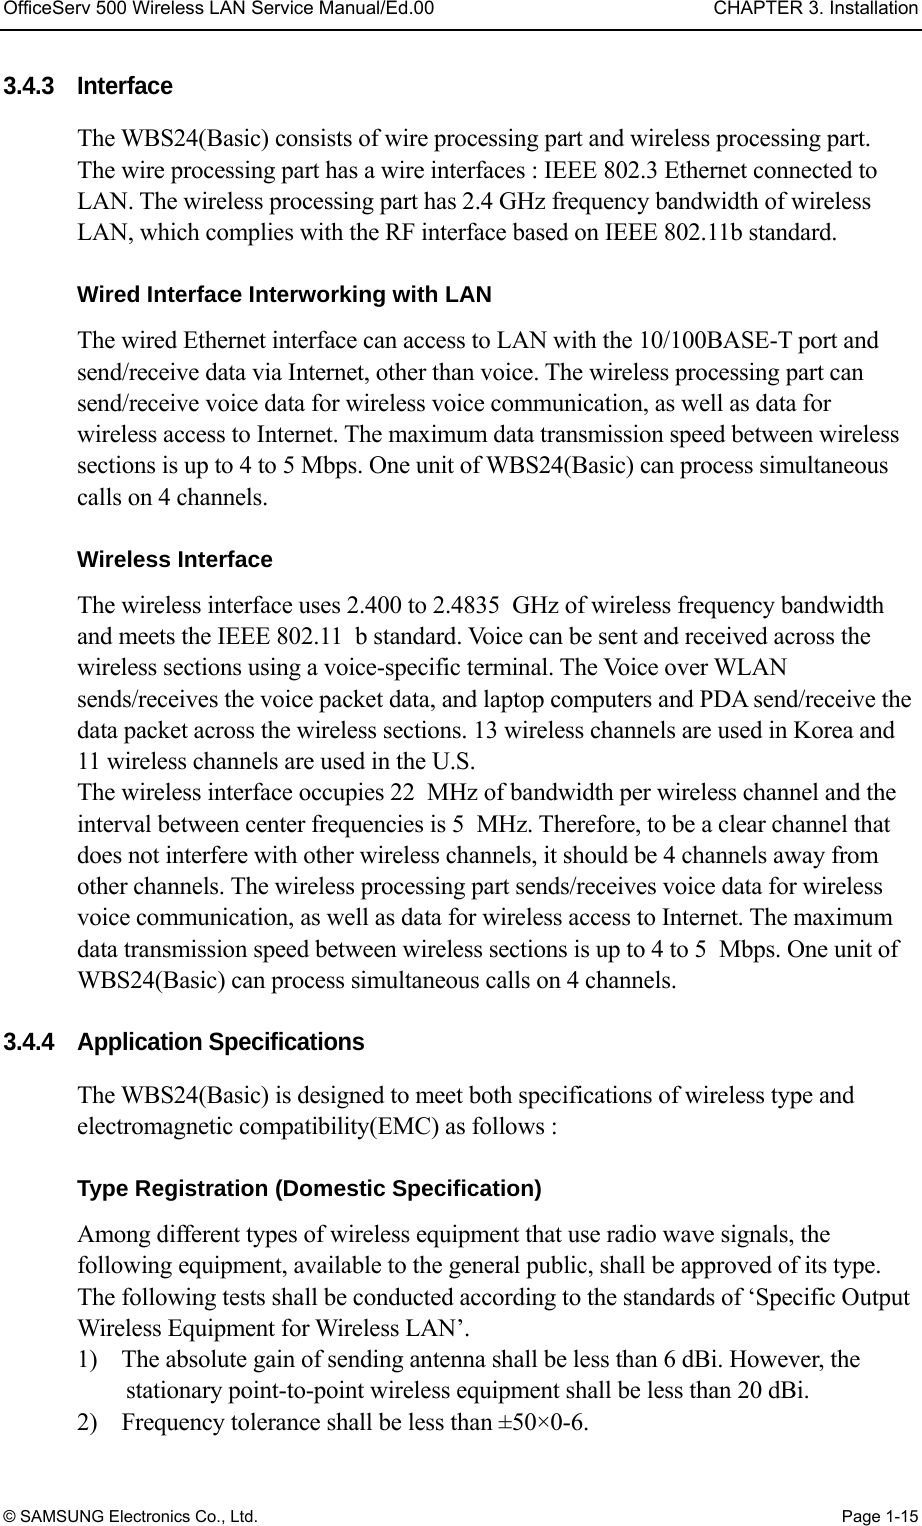 OfficeServ 500 Wireless LAN Service Manual/Ed.00  CHAPTER 3. Installation © SAMSUNG Electronics Co., Ltd.  Page 1-15 3.4.3 Interface    The WBS24(Basic) consists of wire processing part and wireless processing part.   The wire processing part has a wire interfaces : IEEE 802.3 Ethernet connected to LAN. The wireless processing part has 2.4 GHz frequency bandwidth of wireless LAN, which complies with the RF interface based on IEEE 802.11b standard.  Wired Interface Interworking with LAN The wired Ethernet interface can access to LAN with the 10/100BASE-T port and send/receive data via Internet, other than voice. The wireless processing part can send/receive voice data for wireless voice communication, as well as data for wireless access to Internet. The maximum data transmission speed between wireless sections is up to 4 to 5 Mbps. One unit of WBS24(Basic) can process simultaneous calls on 4 channels.    Wireless Interface The wireless interface uses 2.400 to 2.4835 GHz of wireless frequency bandwidth and meets the IEEE 802.11 b standard. Voice can be sent and received across the wireless sections using a voice-specific terminal. The Voice over WLAN sends/receives the voice packet data, and laptop computers and PDA send/receive the data packet across the wireless sections. 13 wireless channels are used in Korea and 11 wireless channels are used in the U.S.   The wireless interface occupies 22 MHz of bandwidth per wireless channel and the interval between center frequencies is 5 MHz. Therefore, to be a clear channel that does not interfere with other wireless channels, it should be 4 channels away from other channels. The wireless processing part sends/receives voice data for wireless voice communication, as well as data for wireless access to Internet. The maximum data transmission speed between wireless sections is up to 4 to 5 Mbps. One unit of WBS24(Basic) can process simultaneous calls on 4 channels.  3.4.4 Application Specifications The WBS24(Basic) is designed to meet both specifications of wireless type and electromagnetic compatibility(EMC) as follows :    Type Registration (Domestic Specification) Among different types of wireless equipment that use radio wave signals, the following equipment, available to the general public, shall be approved of its type. The following tests shall be conducted according to the standards of ‘Specific Output Wireless Equipment for Wireless LAN’. 1)    The absolute gain of sending antenna shall be less than 6 dBi. However, the stationary point-to-point wireless equipment shall be less than 20 dBi. 2)    Frequency tolerance shall be less than ±50×0-6. 